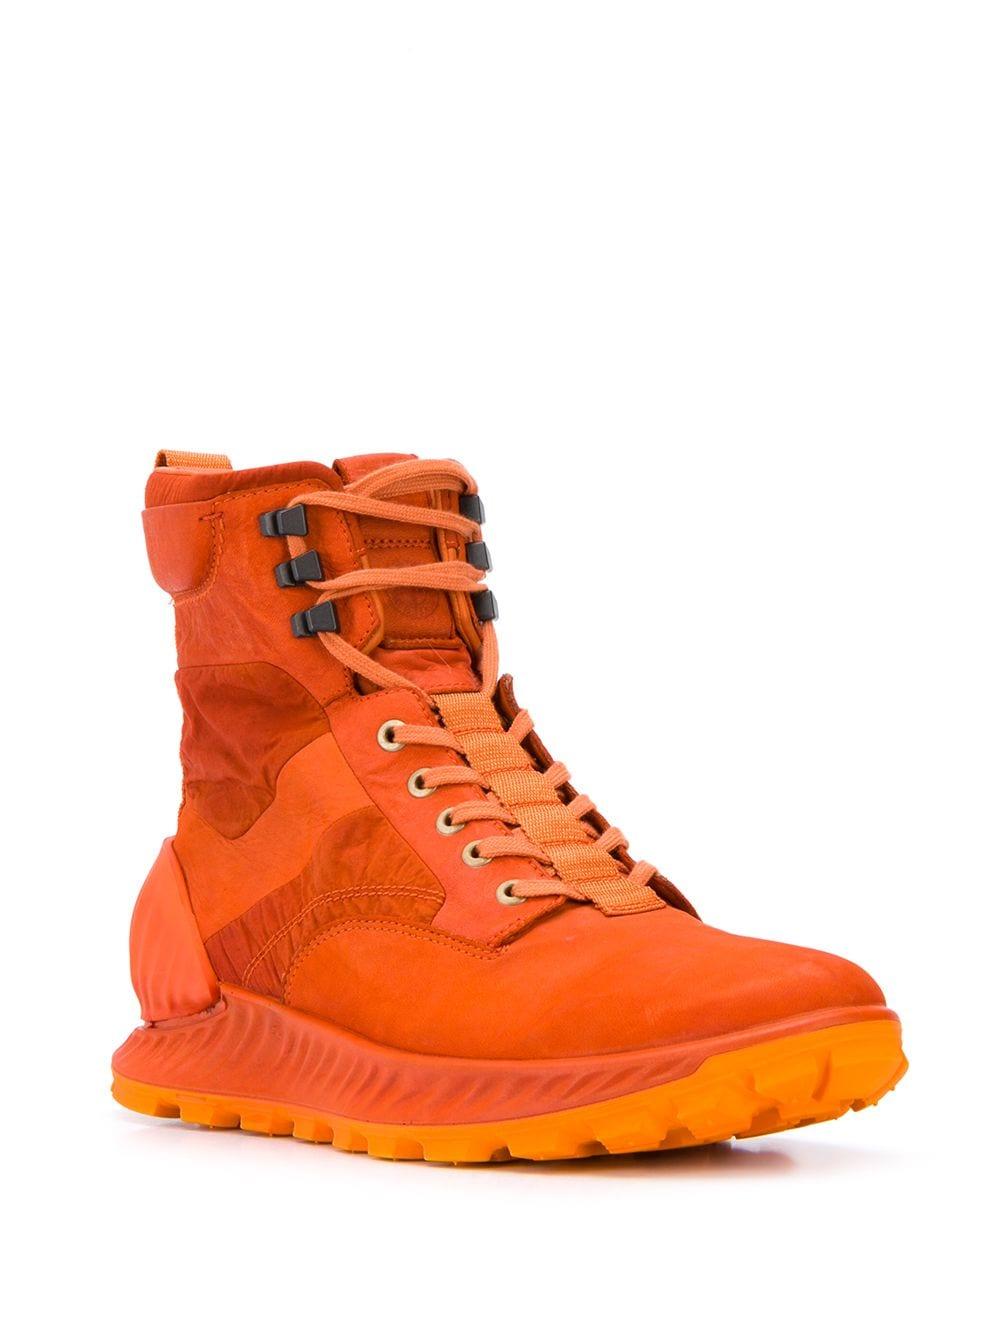 Stone Island Leather Exostrike Boots in Orange for Men | Lyst